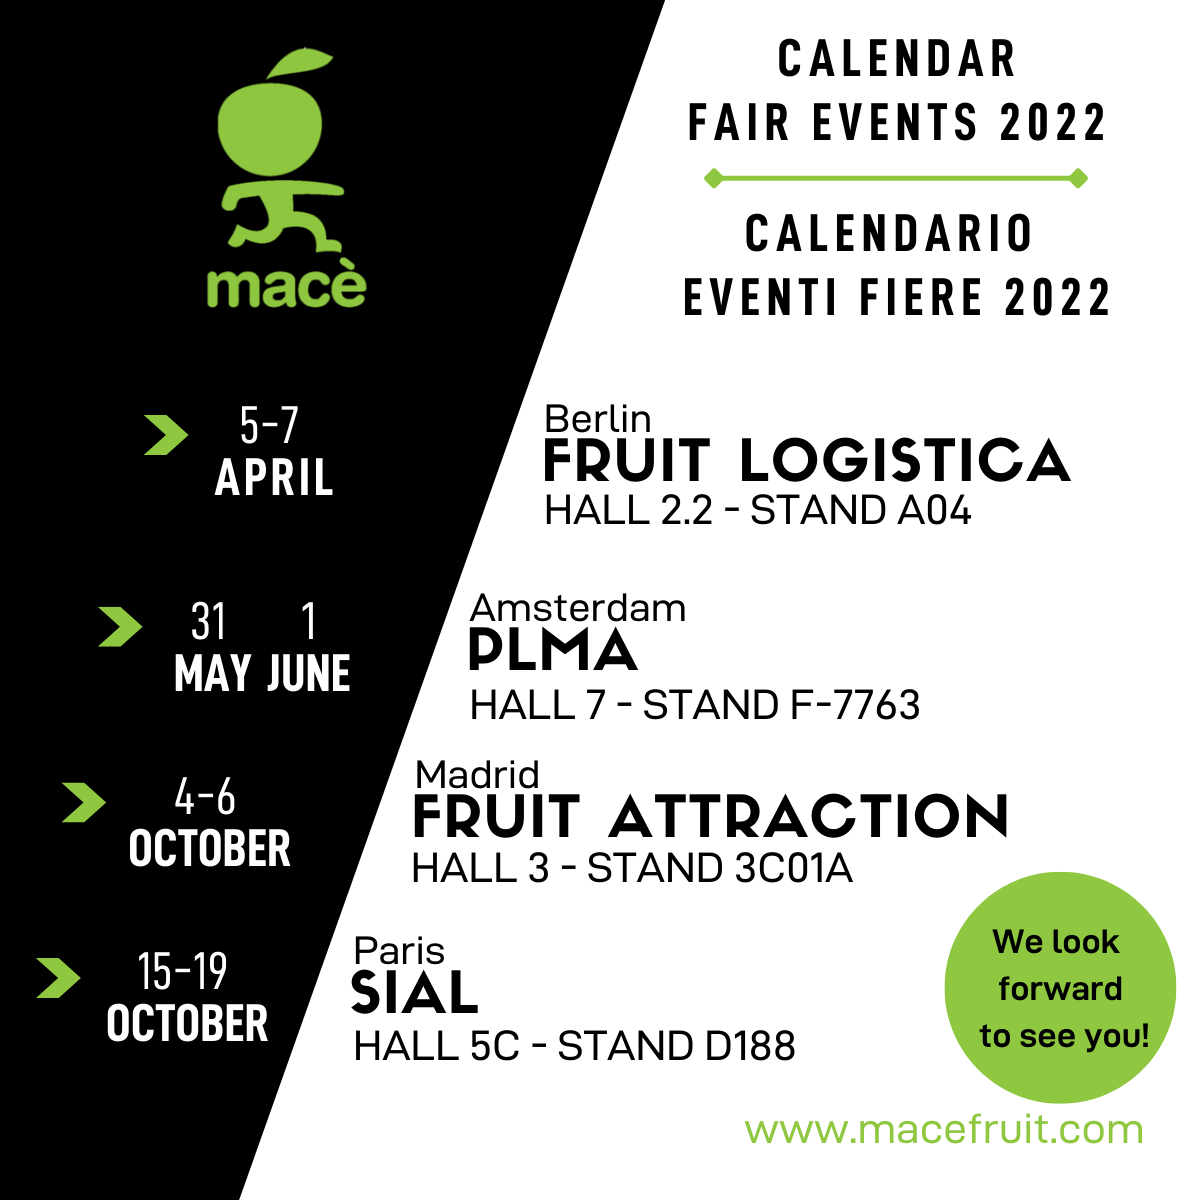 2022 trade fair calendar in which Macé participates: fruit logistica 5-7 April, PLMA 31 May 1 June, fruit attraction 4-6 October, SIAL 15-19 October